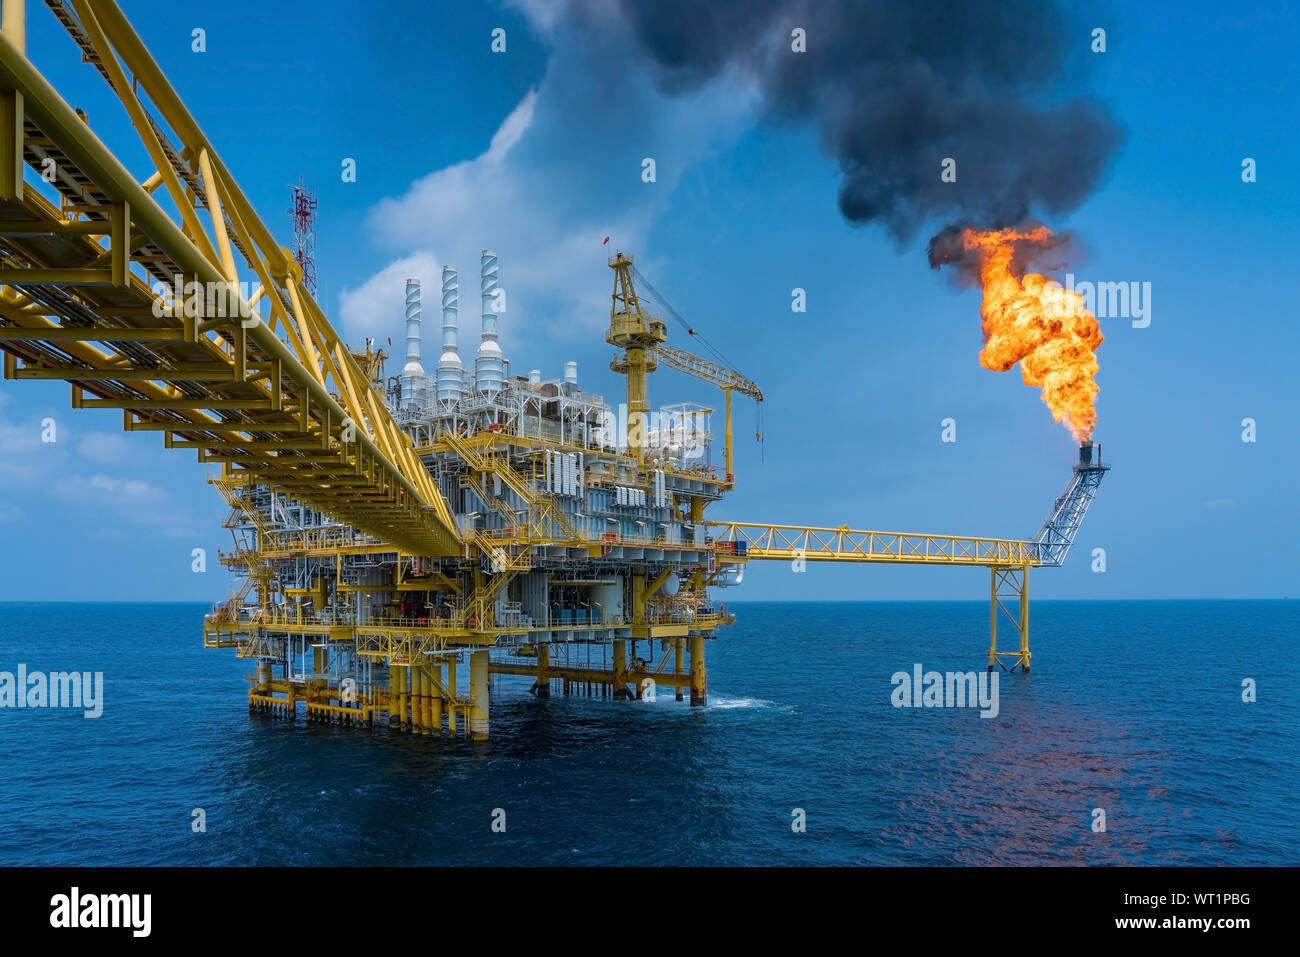 Offshore oil and gas construction platform while vent gases to flare platform to prevent over pressure from process upset, Power and energy business i Stock Photo